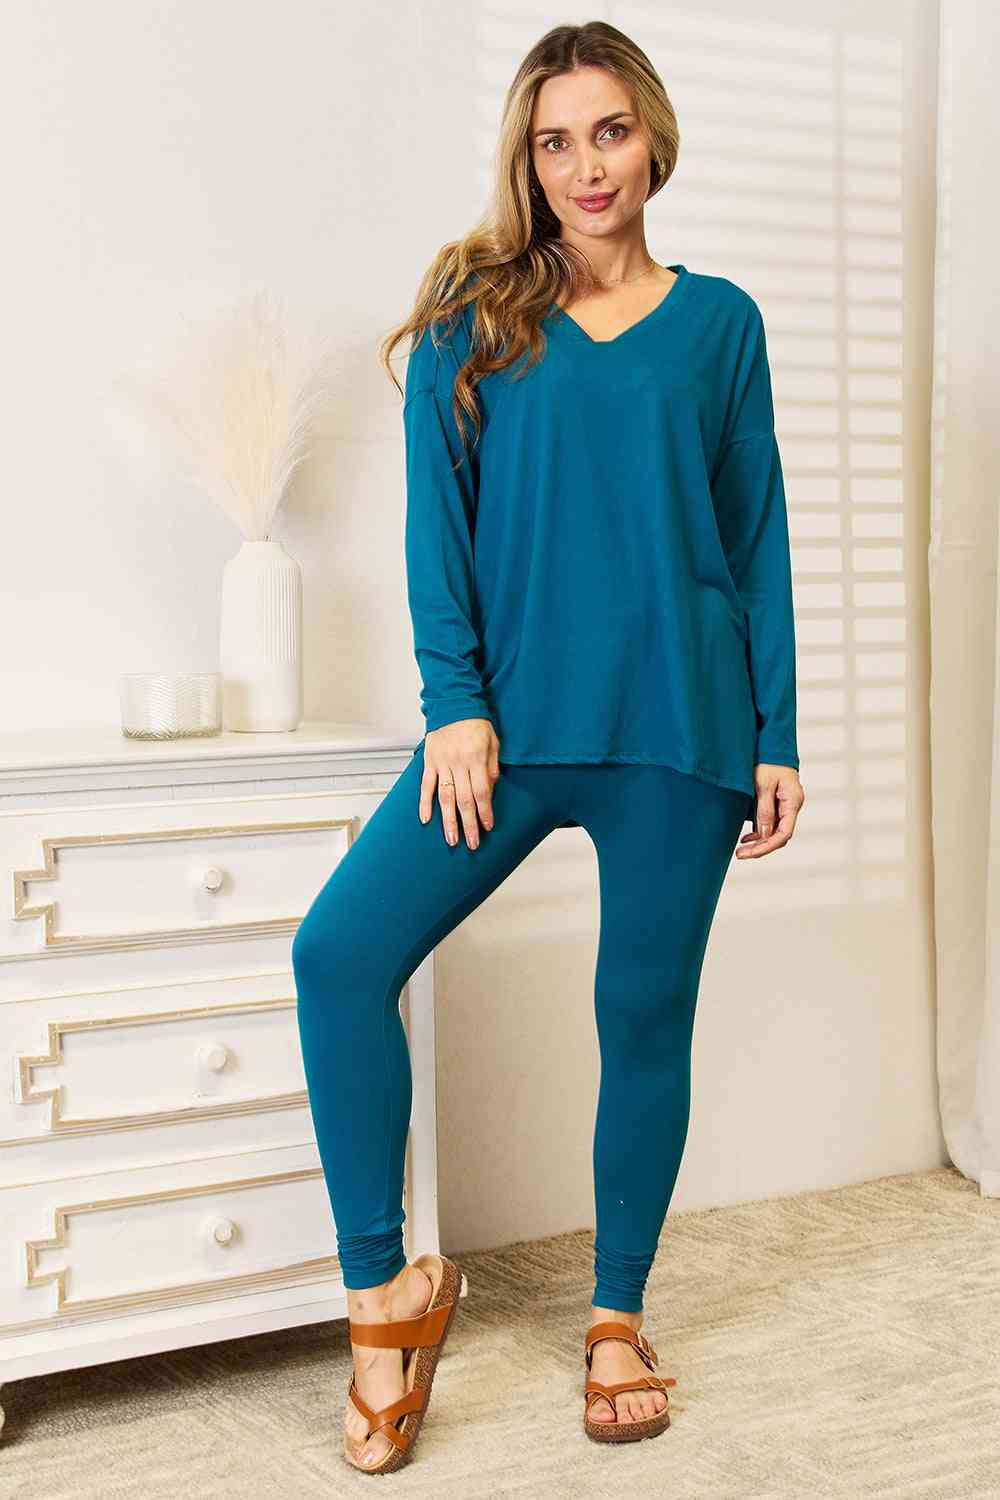 Lazy Days Full Size Long Sleeve Top and Leggings Set - Camis & Tops - Outfit Sets - 5 - 2024